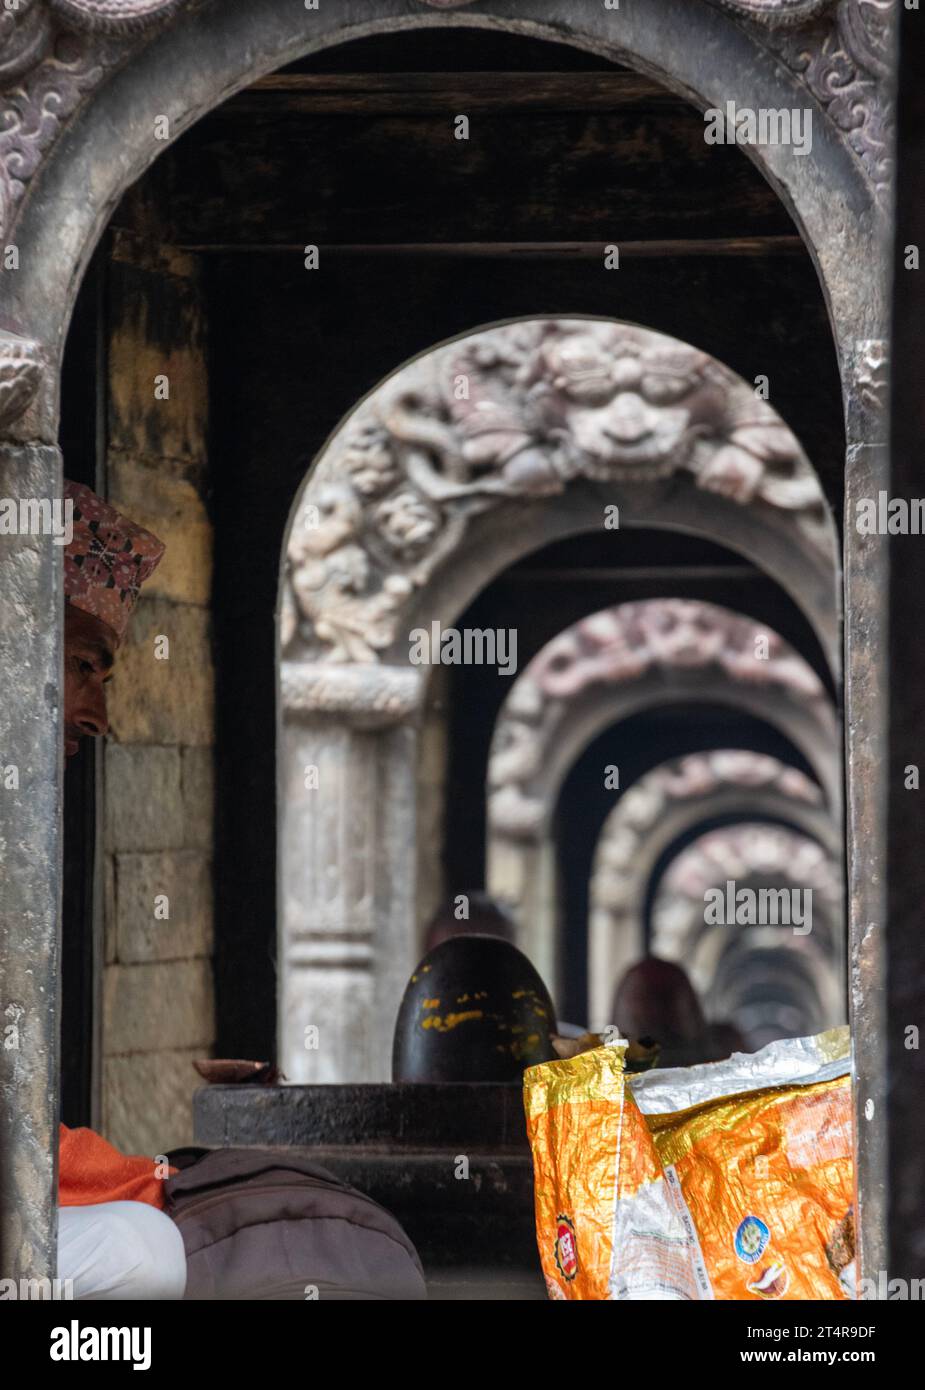 Kathmandu, Nepal: hindu guru waiting for a family to prepare gifts for the dead at Pashupatinath Temple, famous Hindu temple dedicated to Shiva Stock Photo